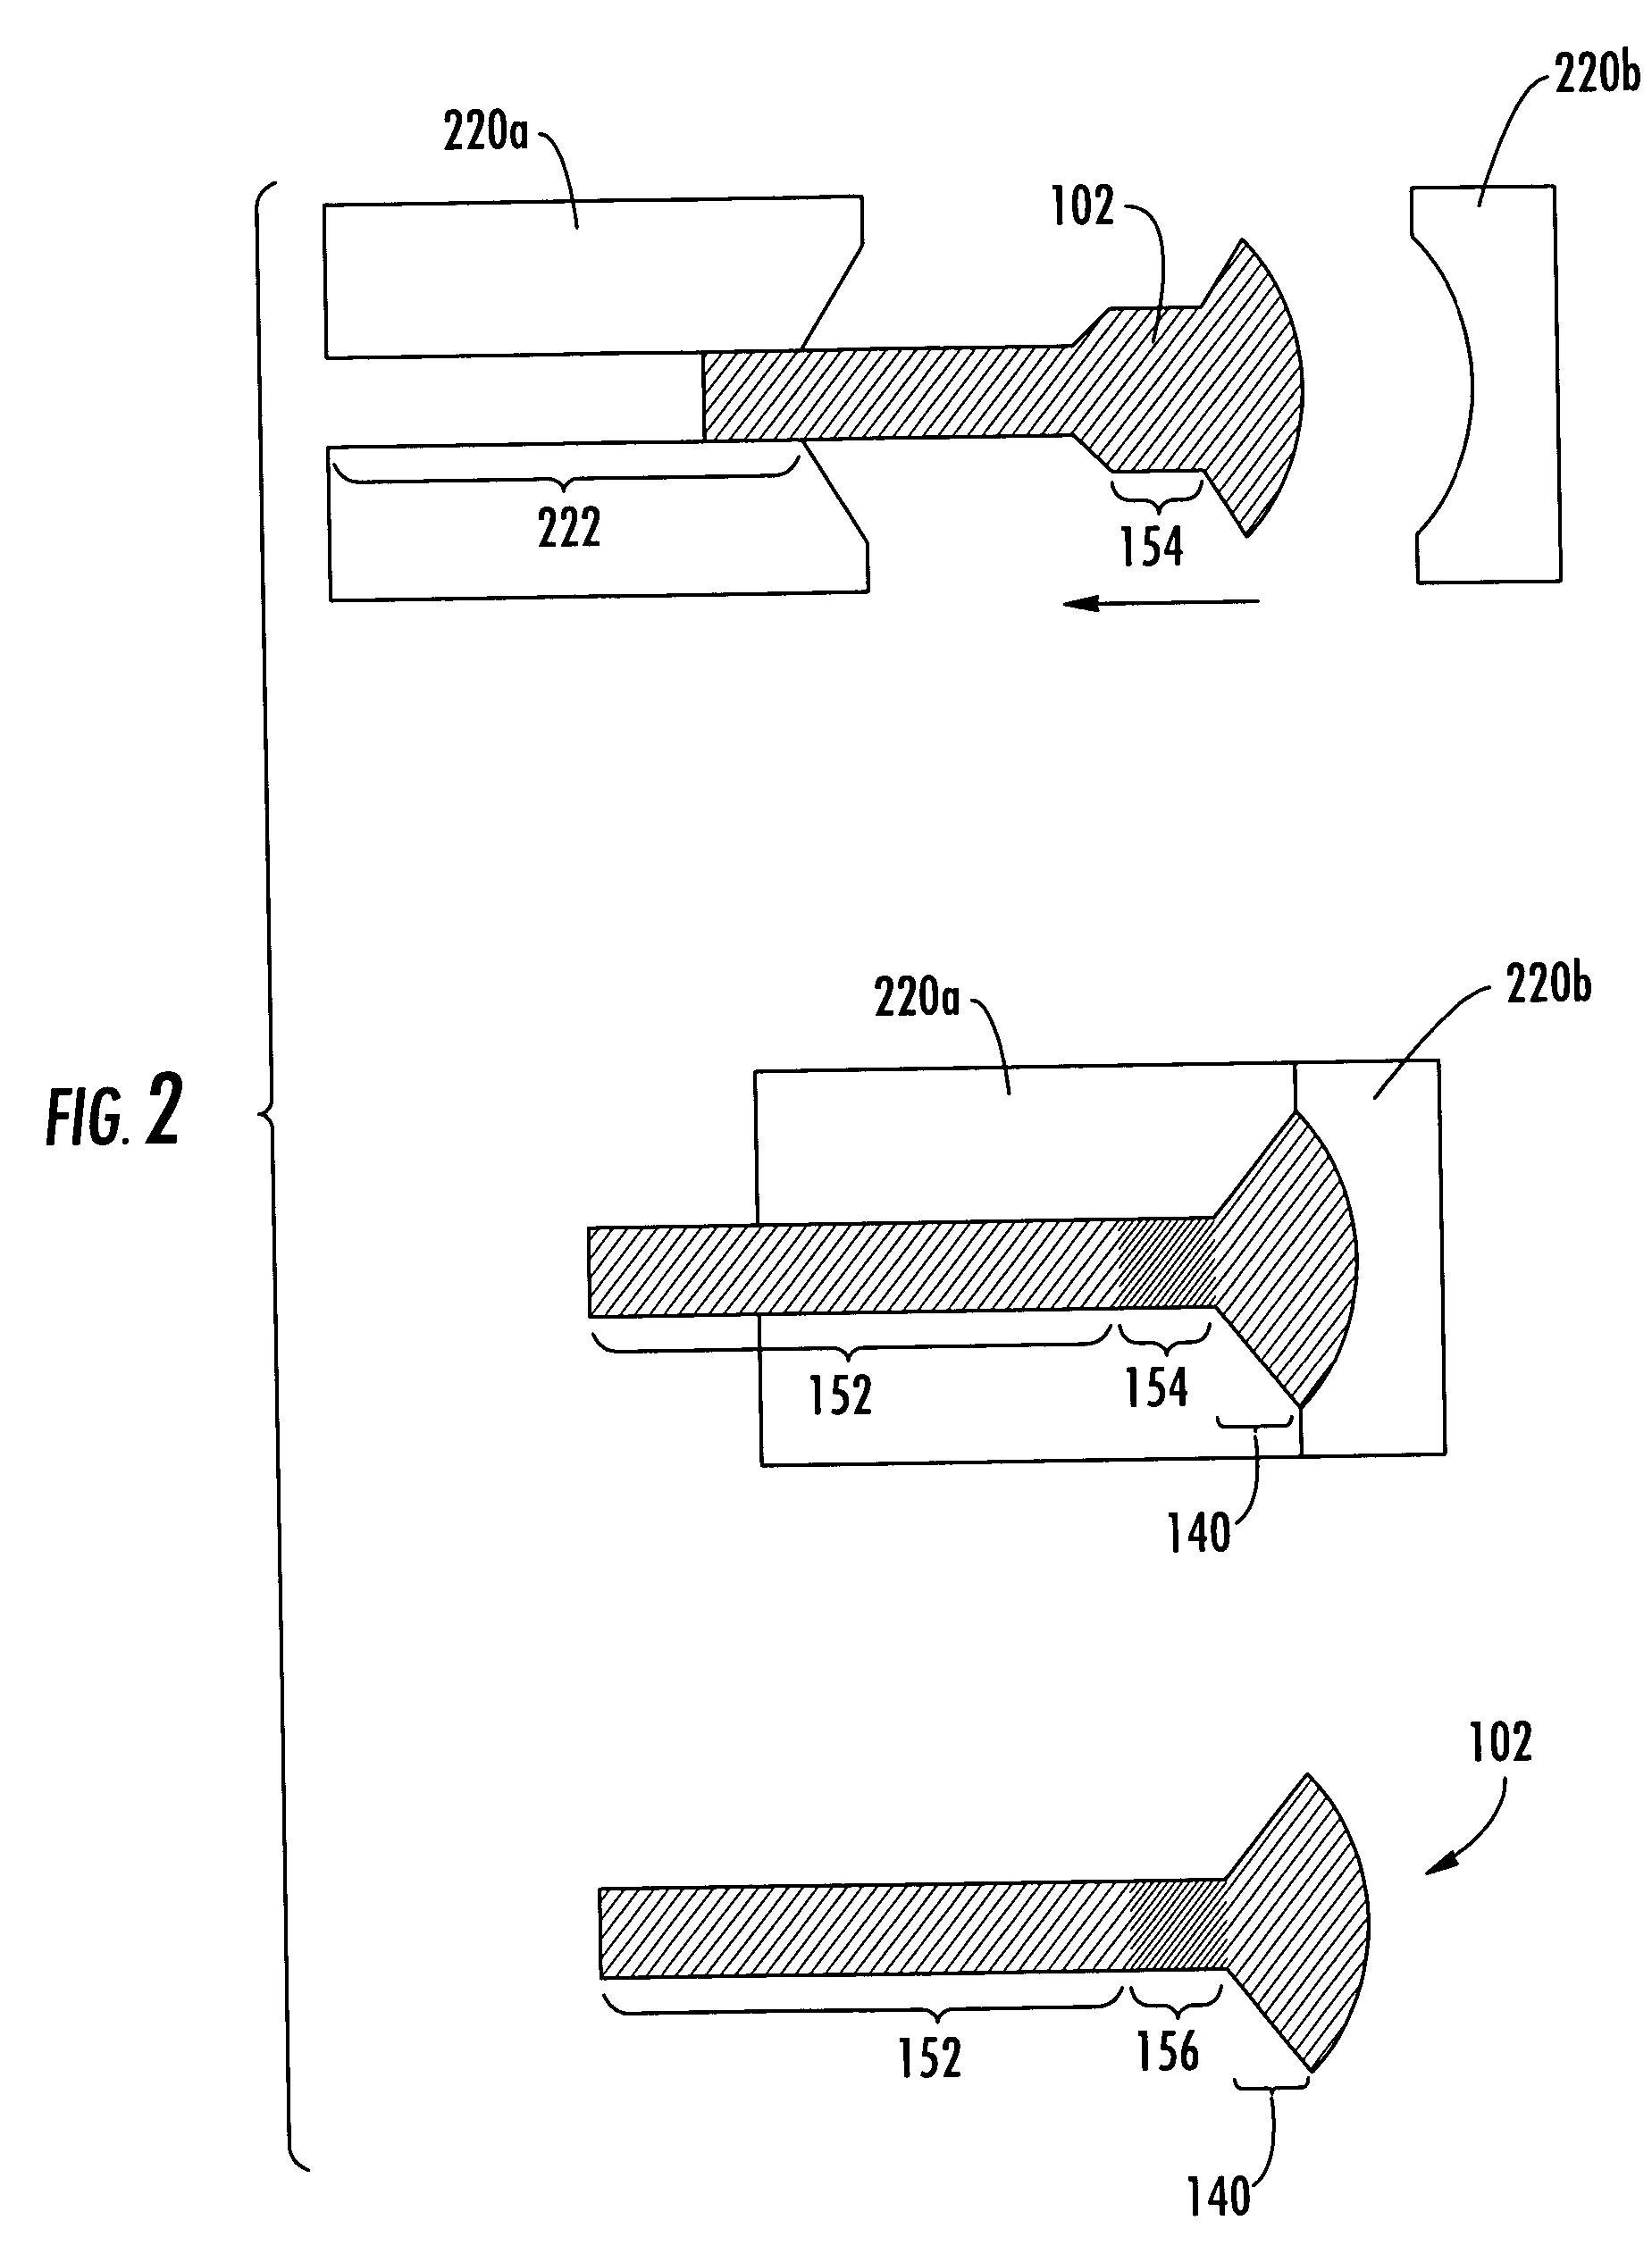 Method for preparing pre-coated aluminum and aluminum-alloy fasteners and components having high-shear strength and readily deformable regions